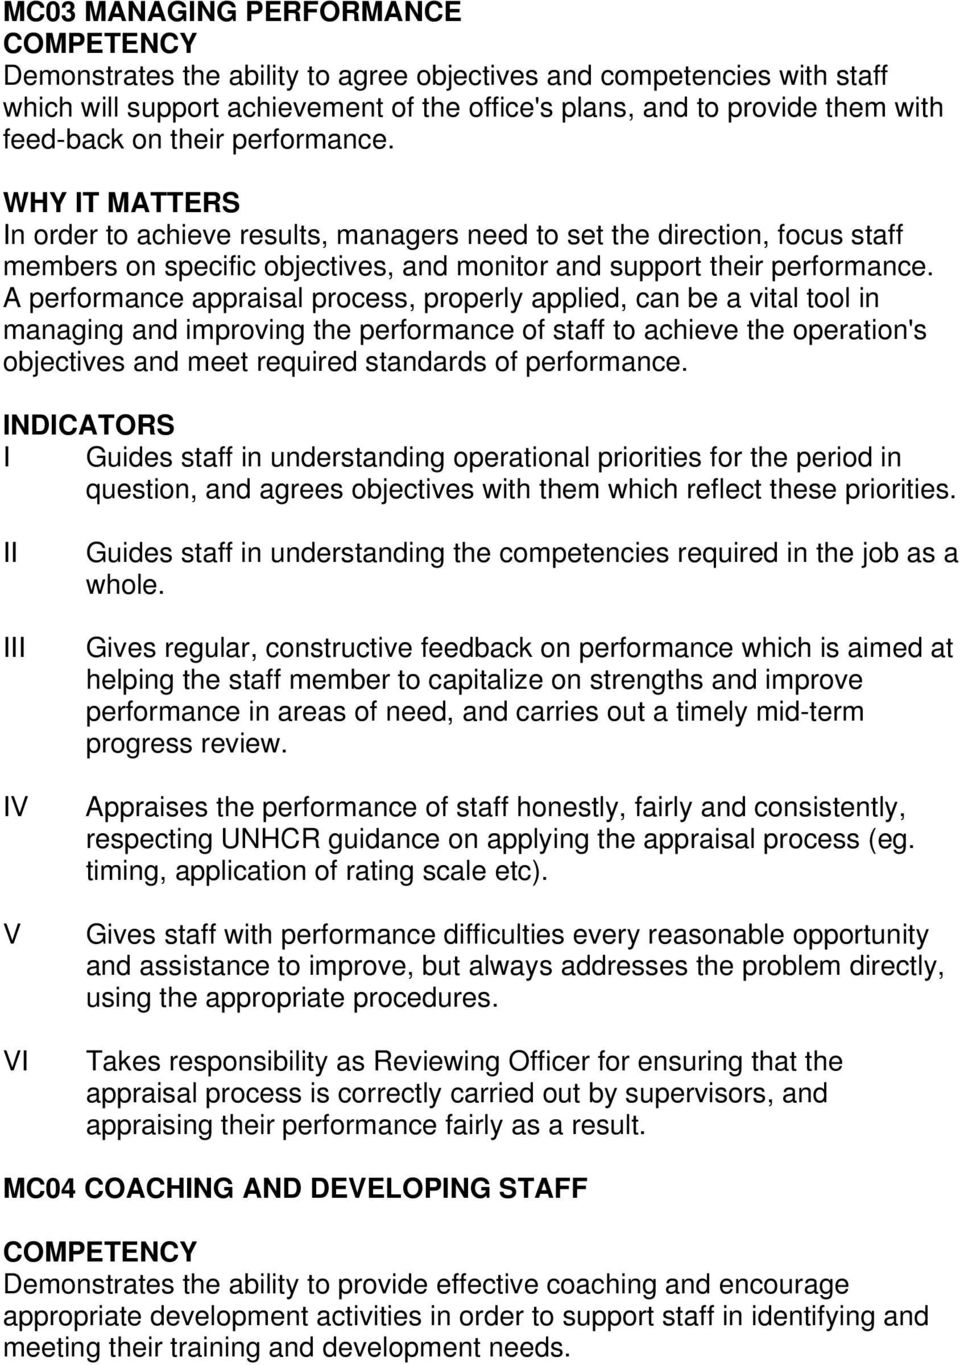 A performance appraisal process, properly applied, can be a vital tool in managing and improving the performance of staff to achieve the operation's objectives and meet required standards of